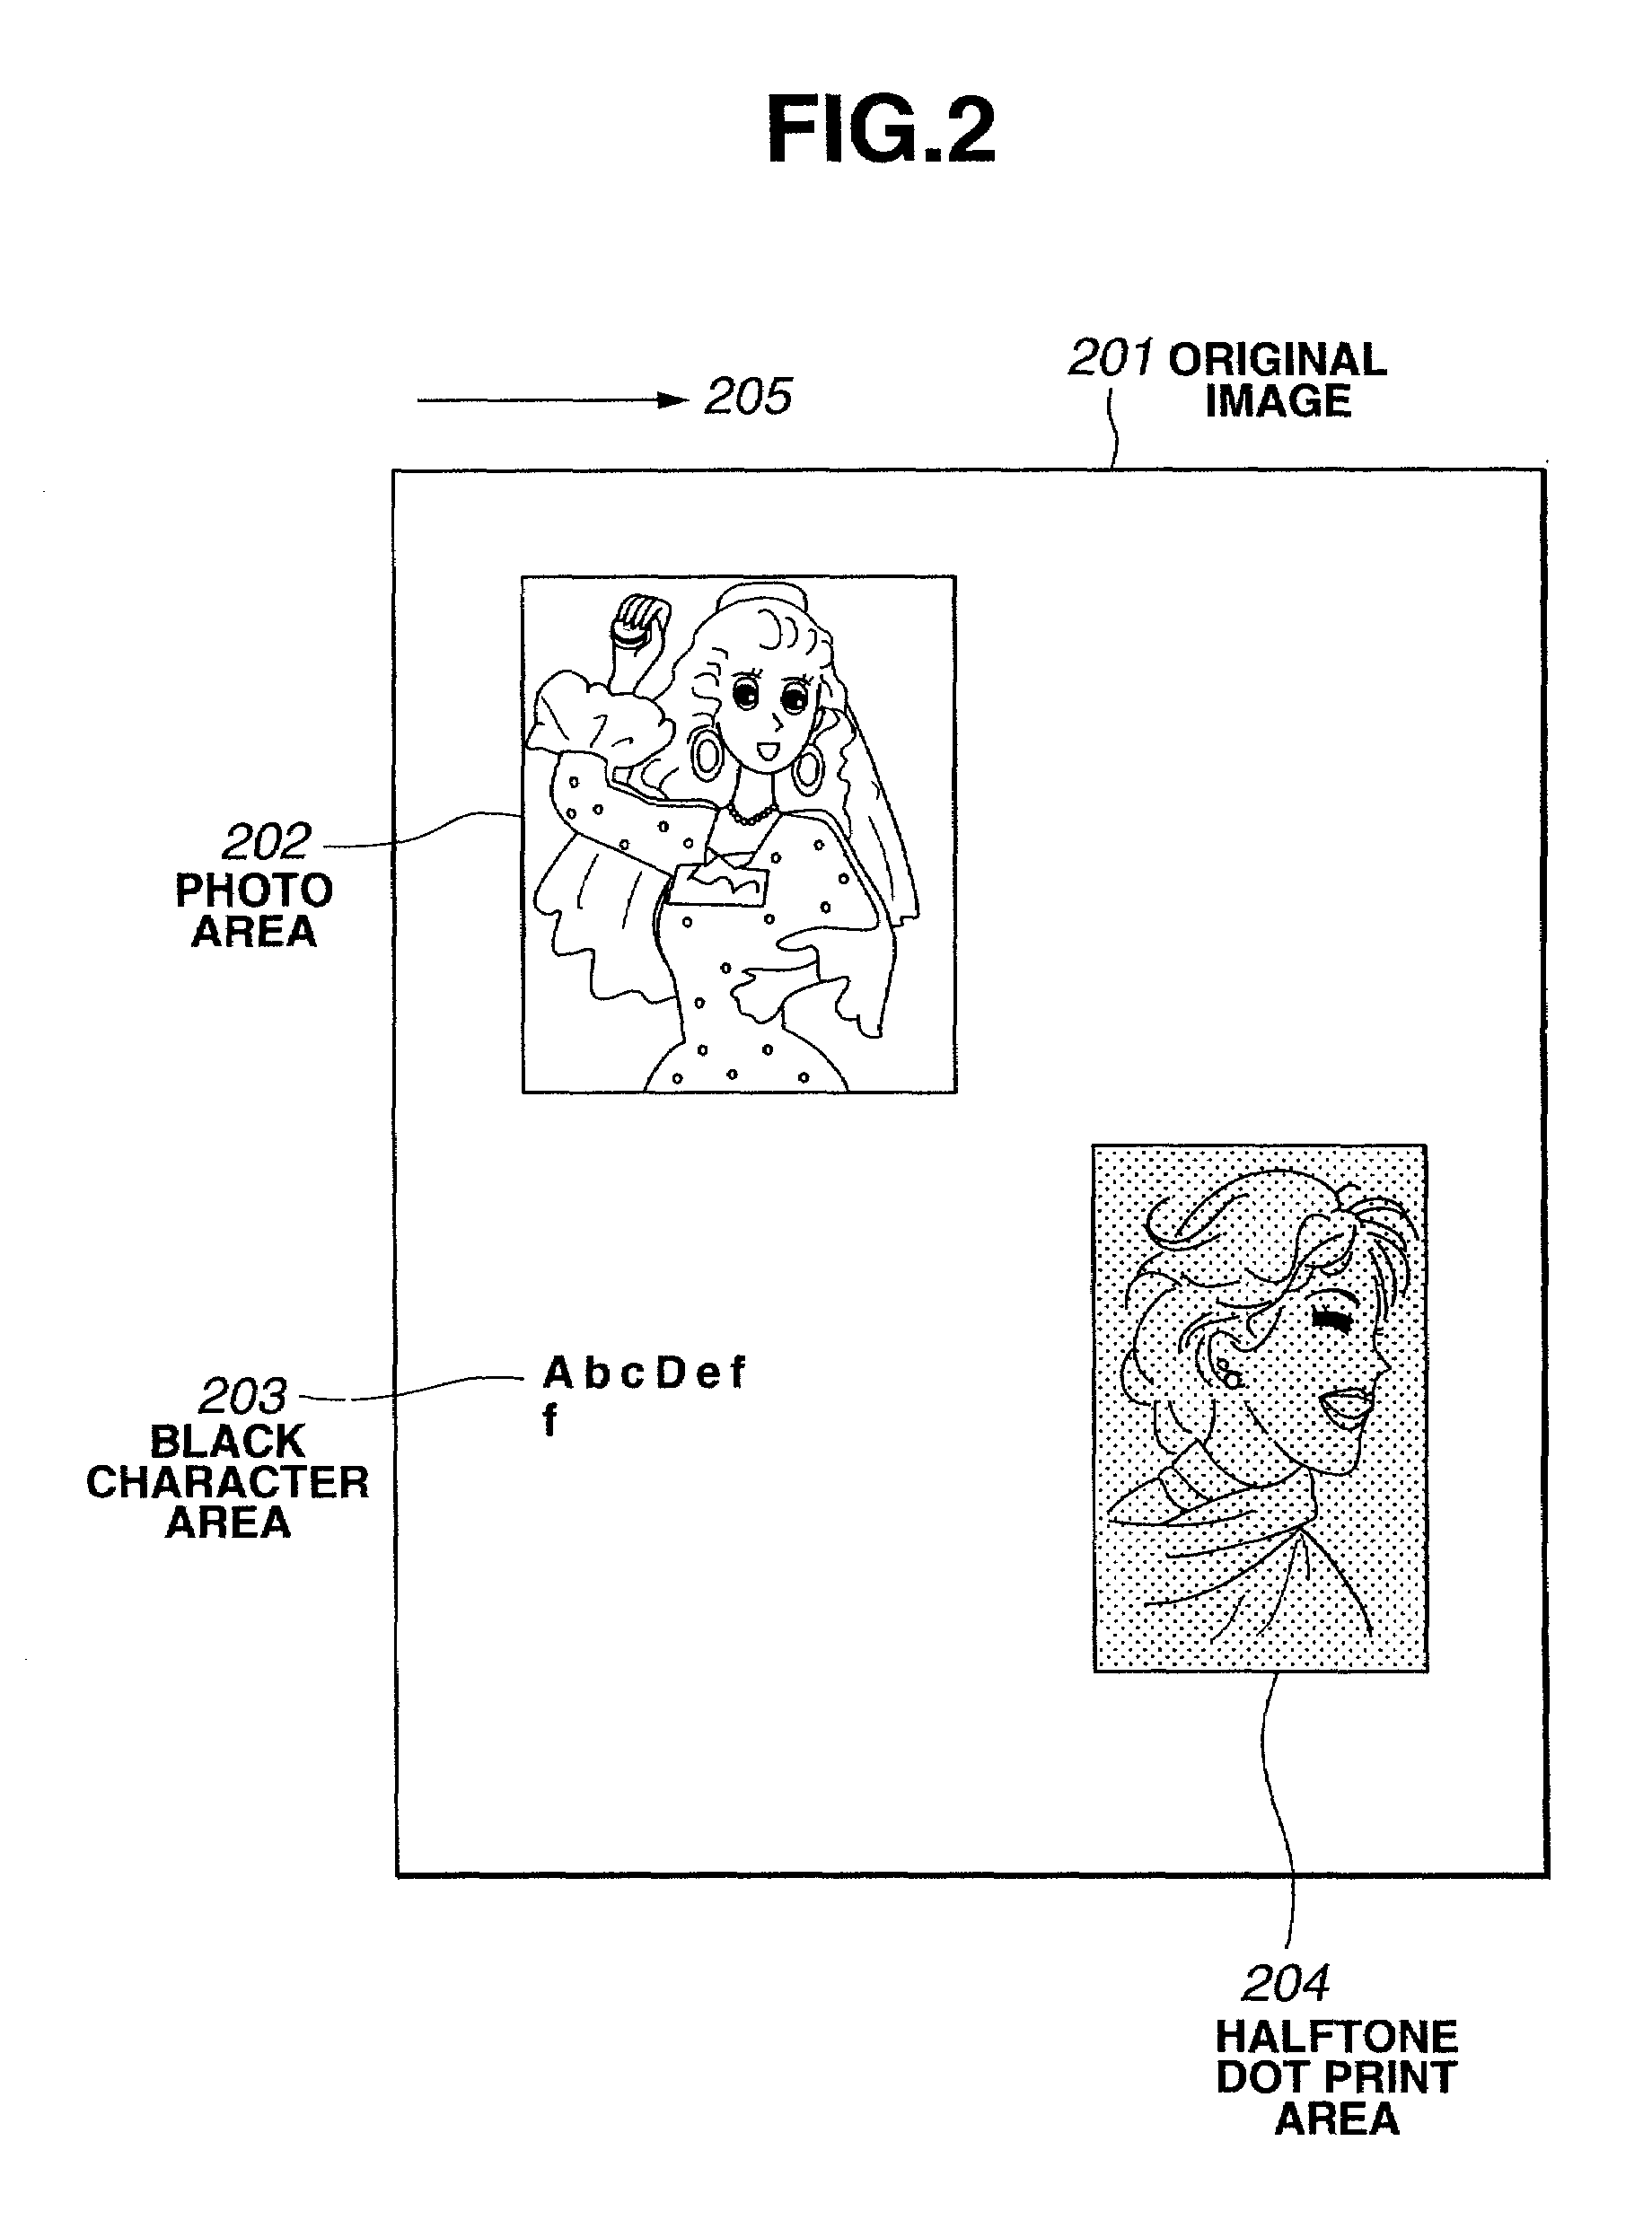 Image processing apparatus, an image processing method and computer program product for combining page description language image data and bitmap image data